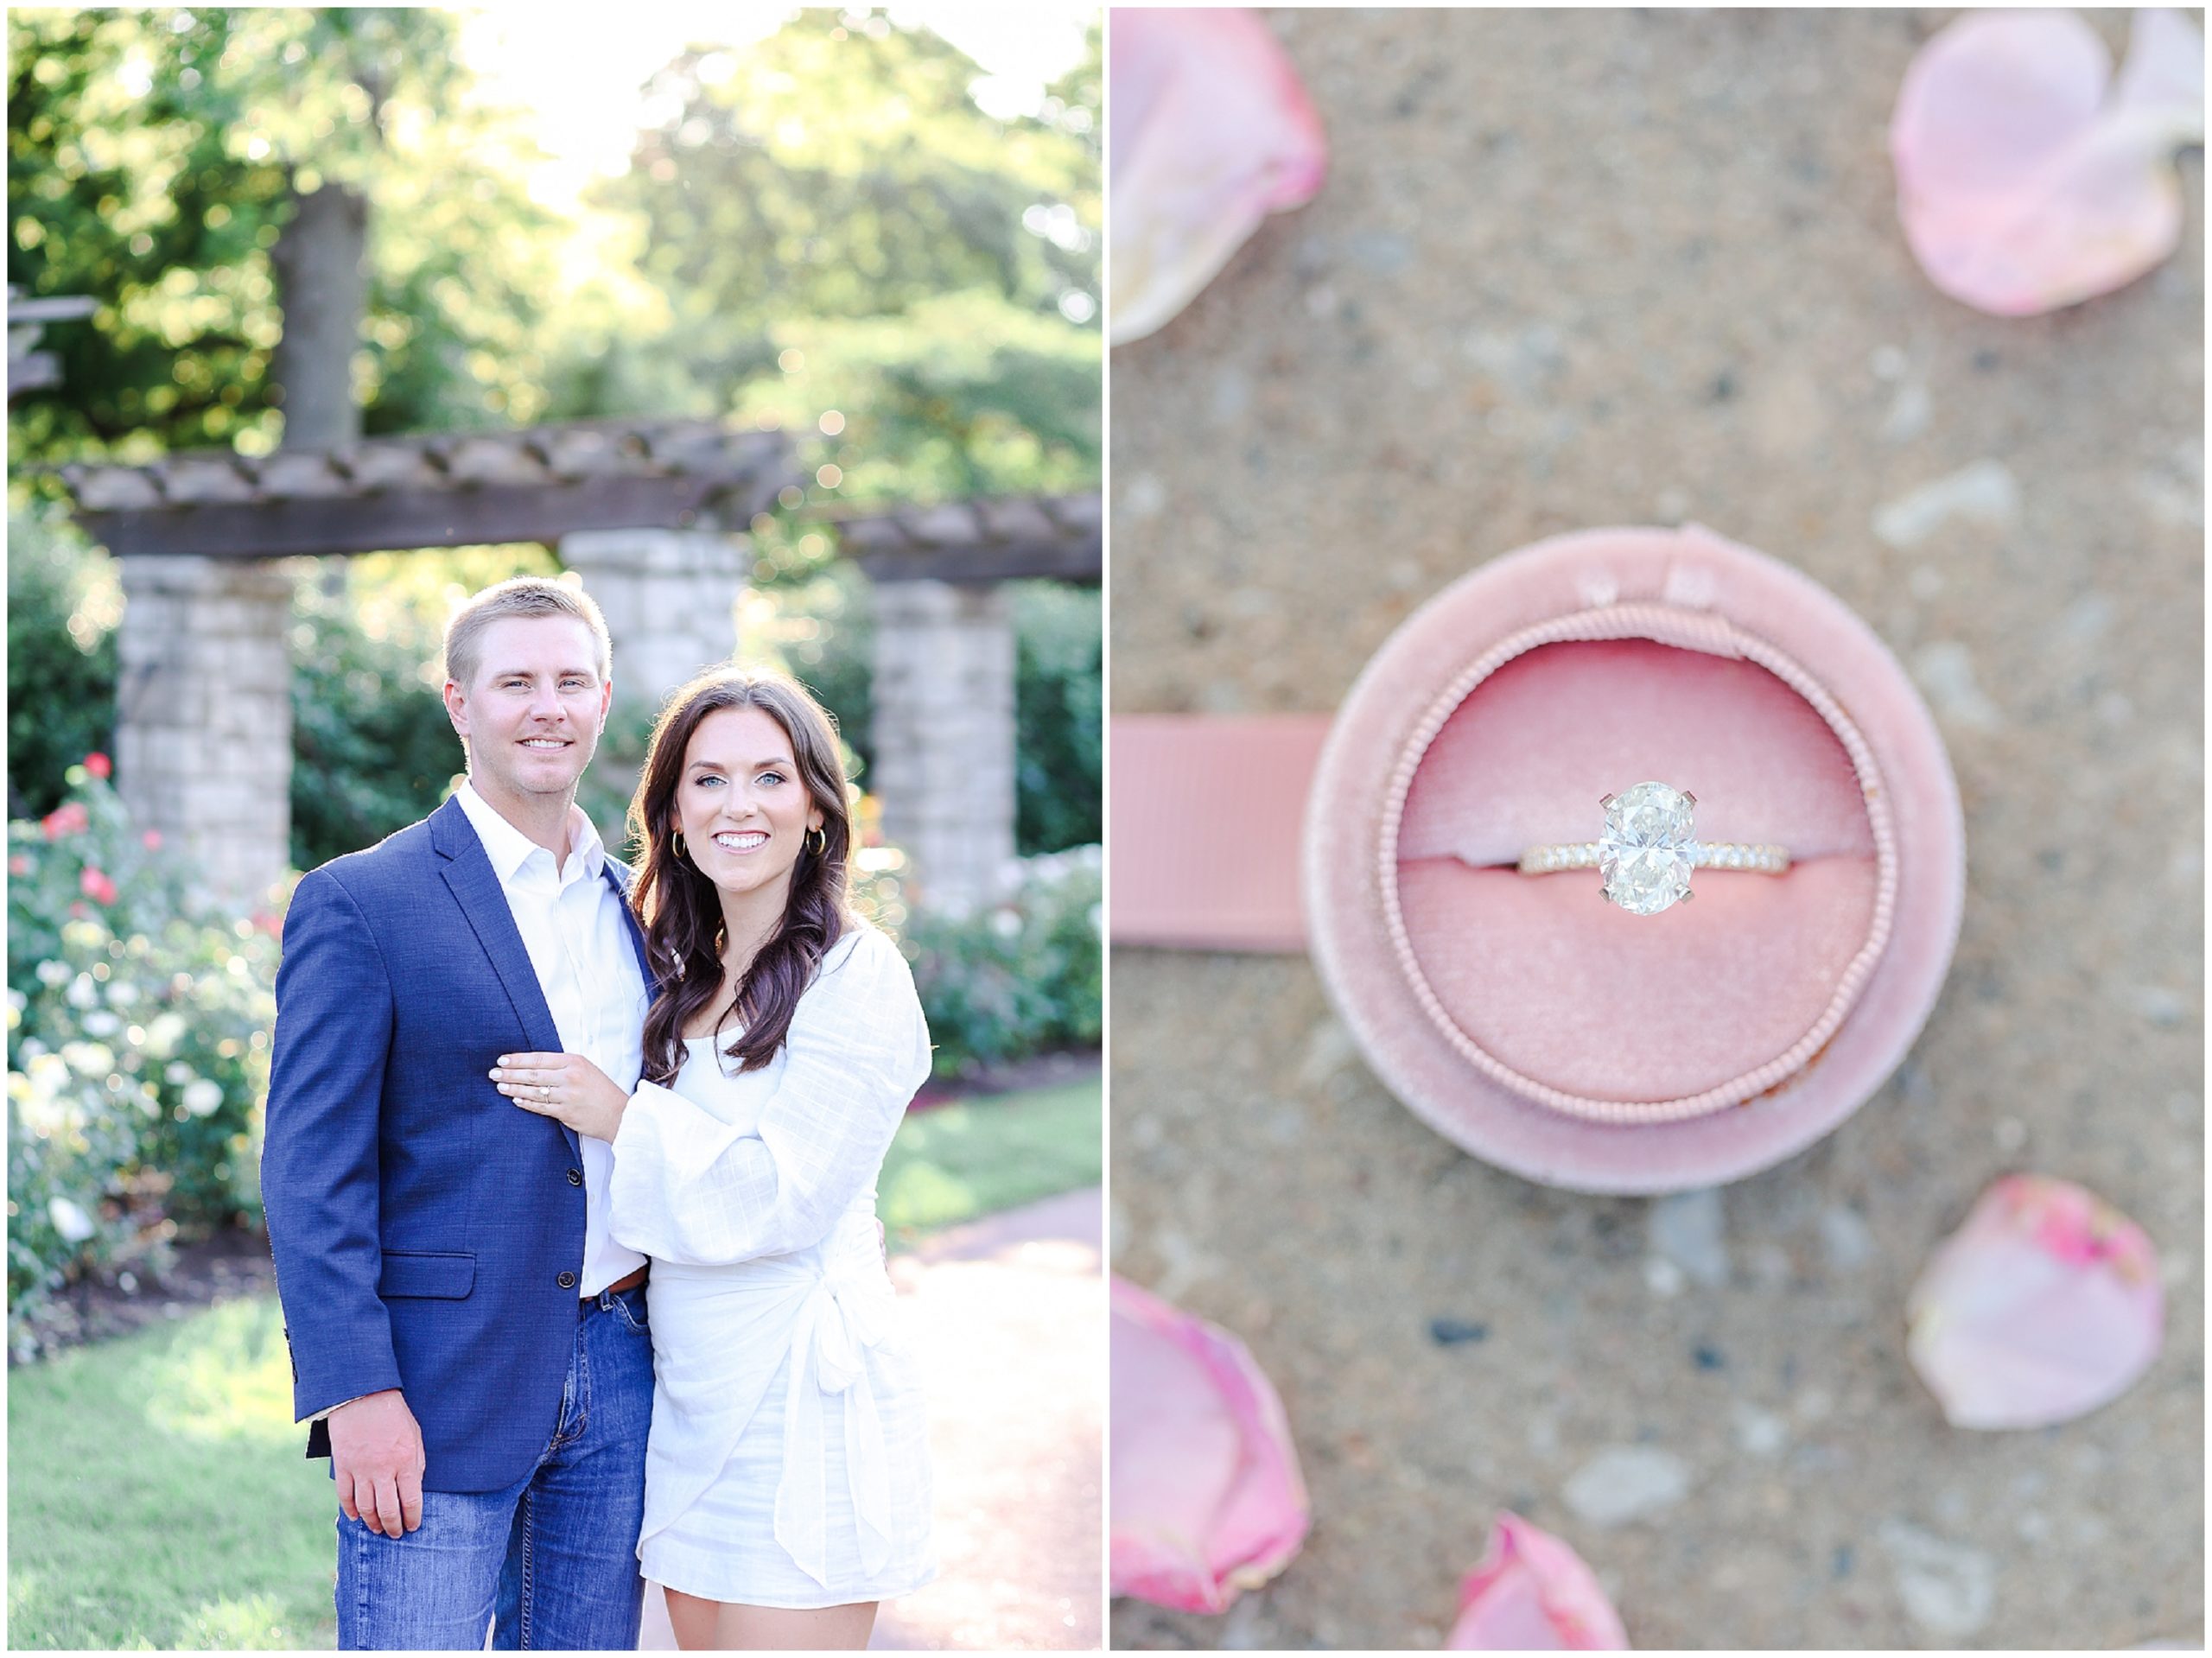 diamond engagement ring - Kansas City Engagement & Wedding Photographer - Rachel & Kyle's Engagement Portraits by Mariam Saifan Photography - Loose Park photos - What to Wear for Your Engagement Portraits - Style Guide - Loose Park Engagement Session - Where to Take Photos in Kansas City